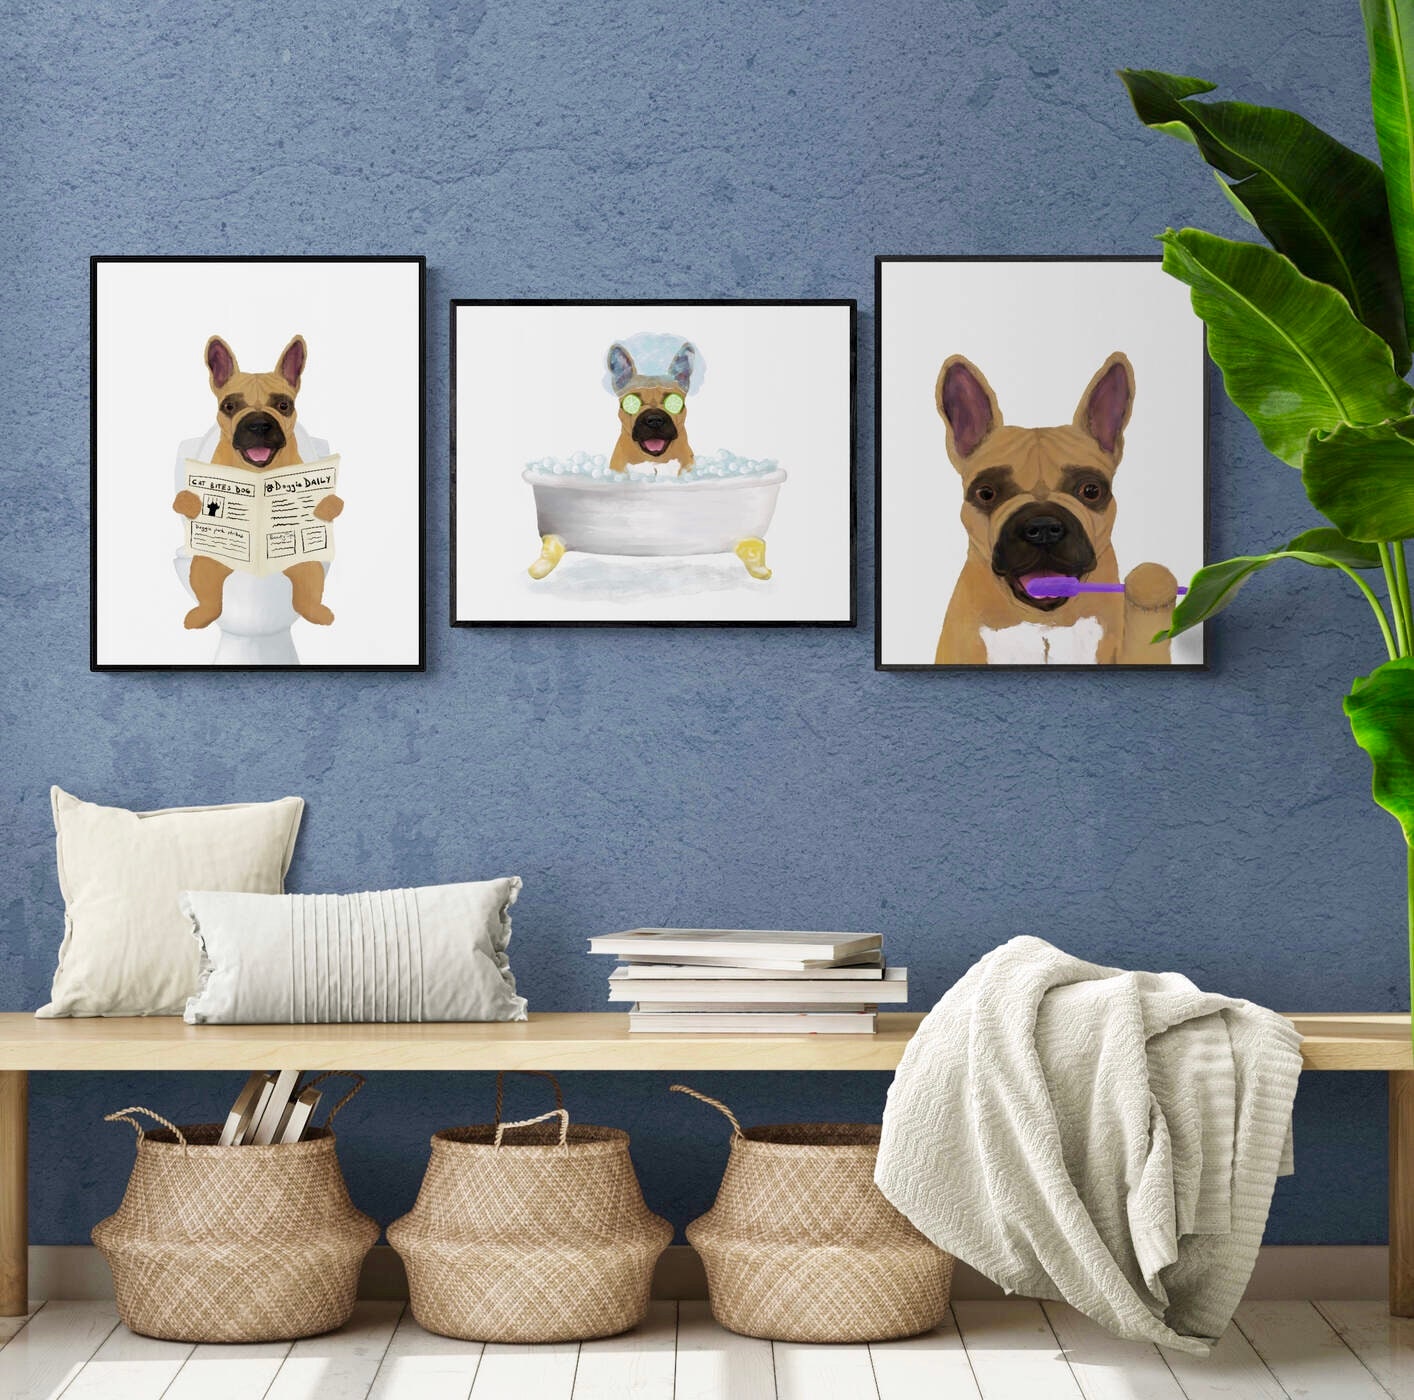 Set of 3 French Bulldog In Bathroom, Brown Frenchie with Toothbrush, Brown dog on Toilet, Dog Painting, Dog In Bathtub Illustration Dog Art,